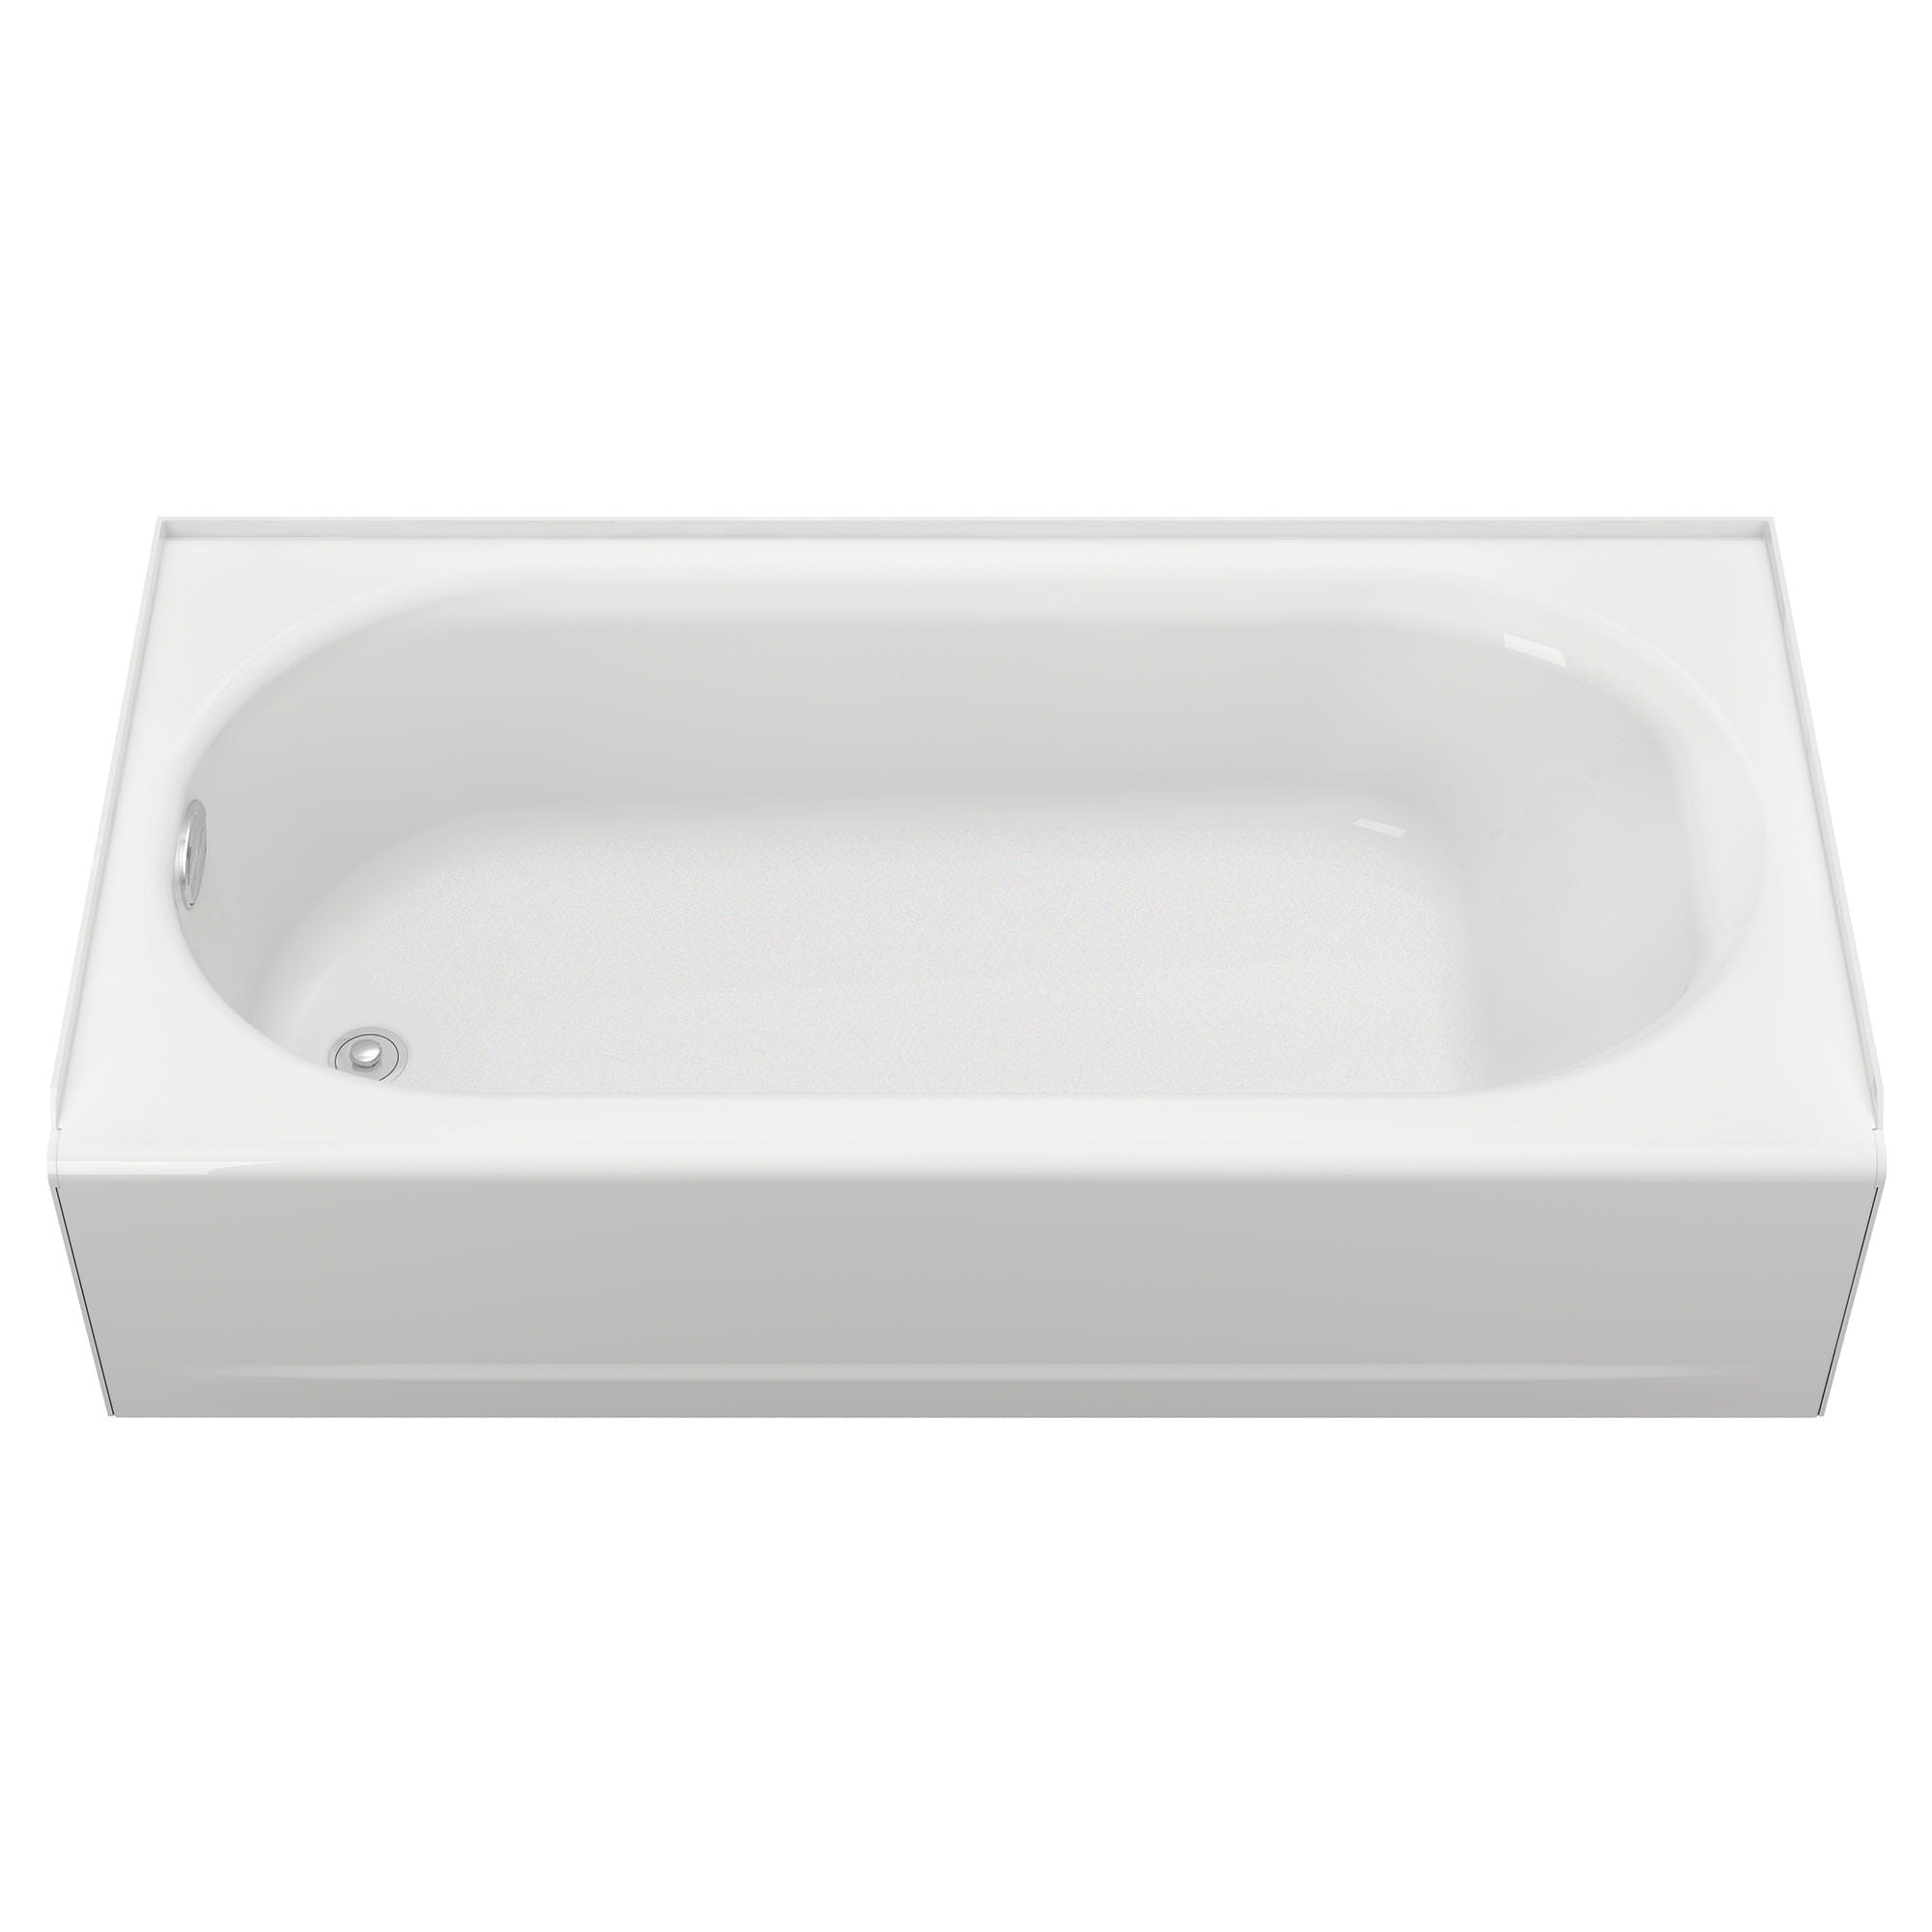 Princeton Americast 60 x 30 Inch Integral Apron Bathtub Above Floor Rough Left Hand Outlet with Integral Drain WHITE